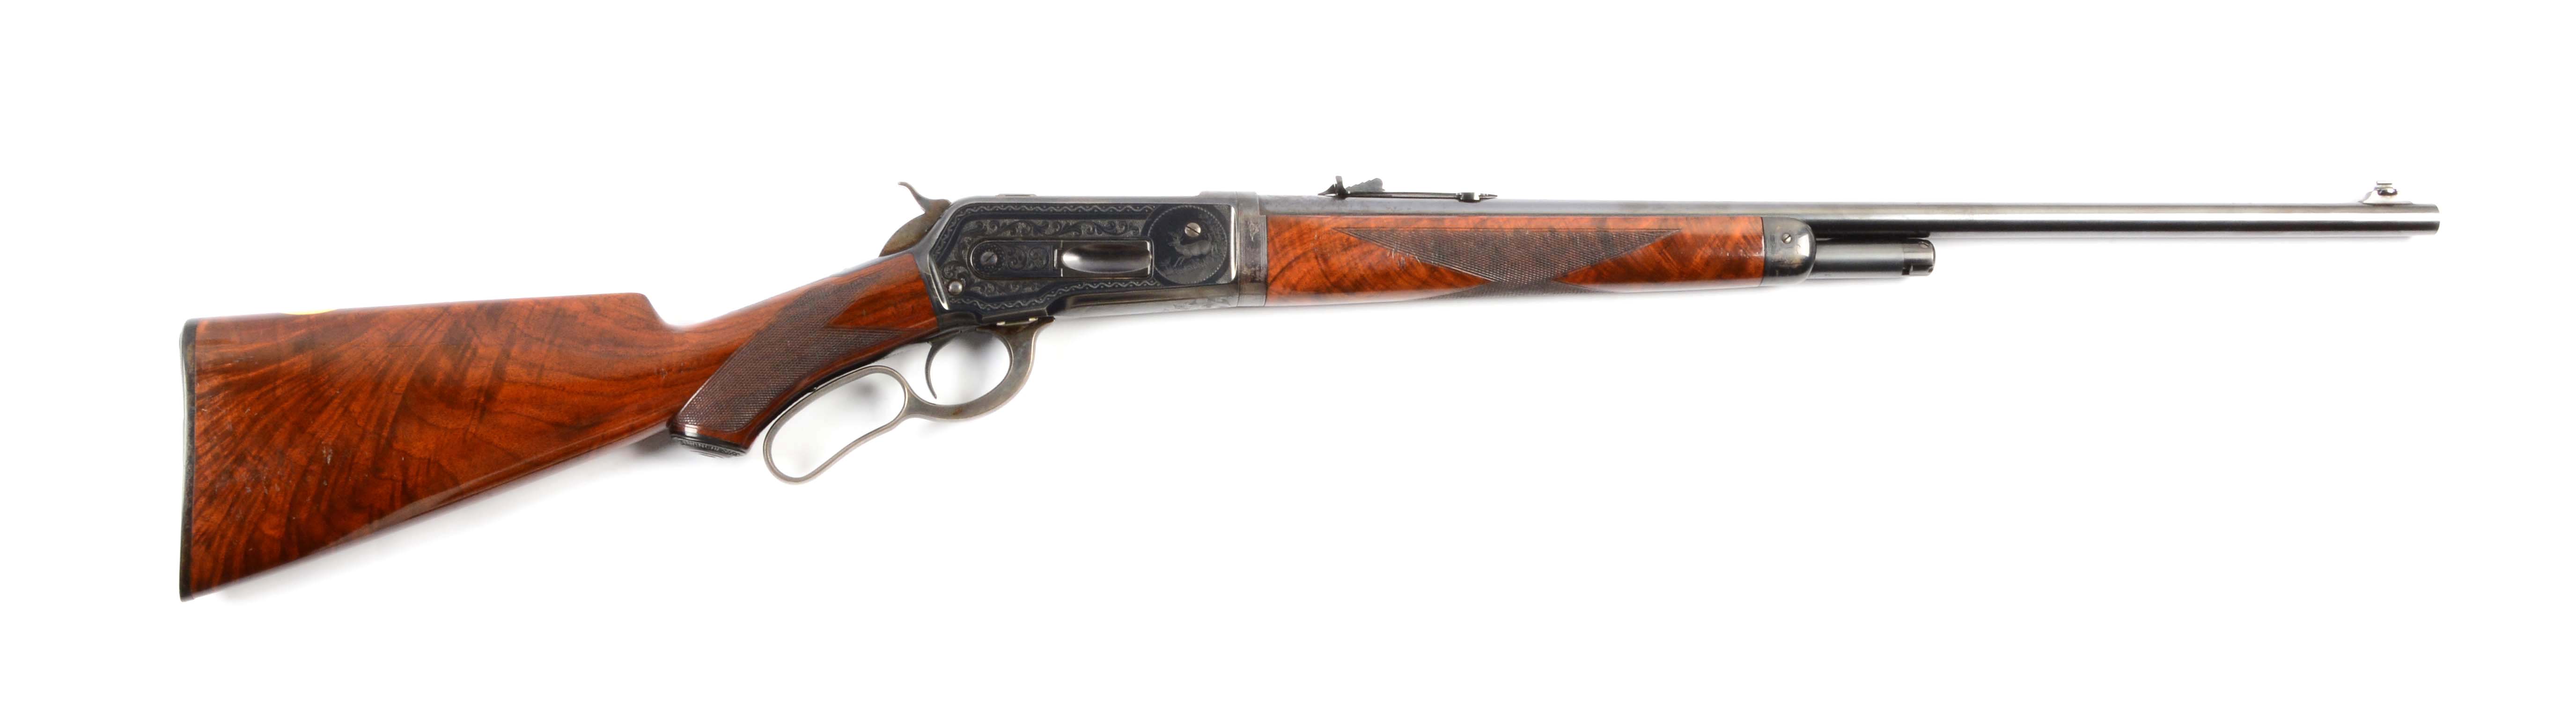 Exquisite Deluxe Factory Engraved Winchester Model 1886 Lever Action Rifle, estimated at $30,000-50,000.